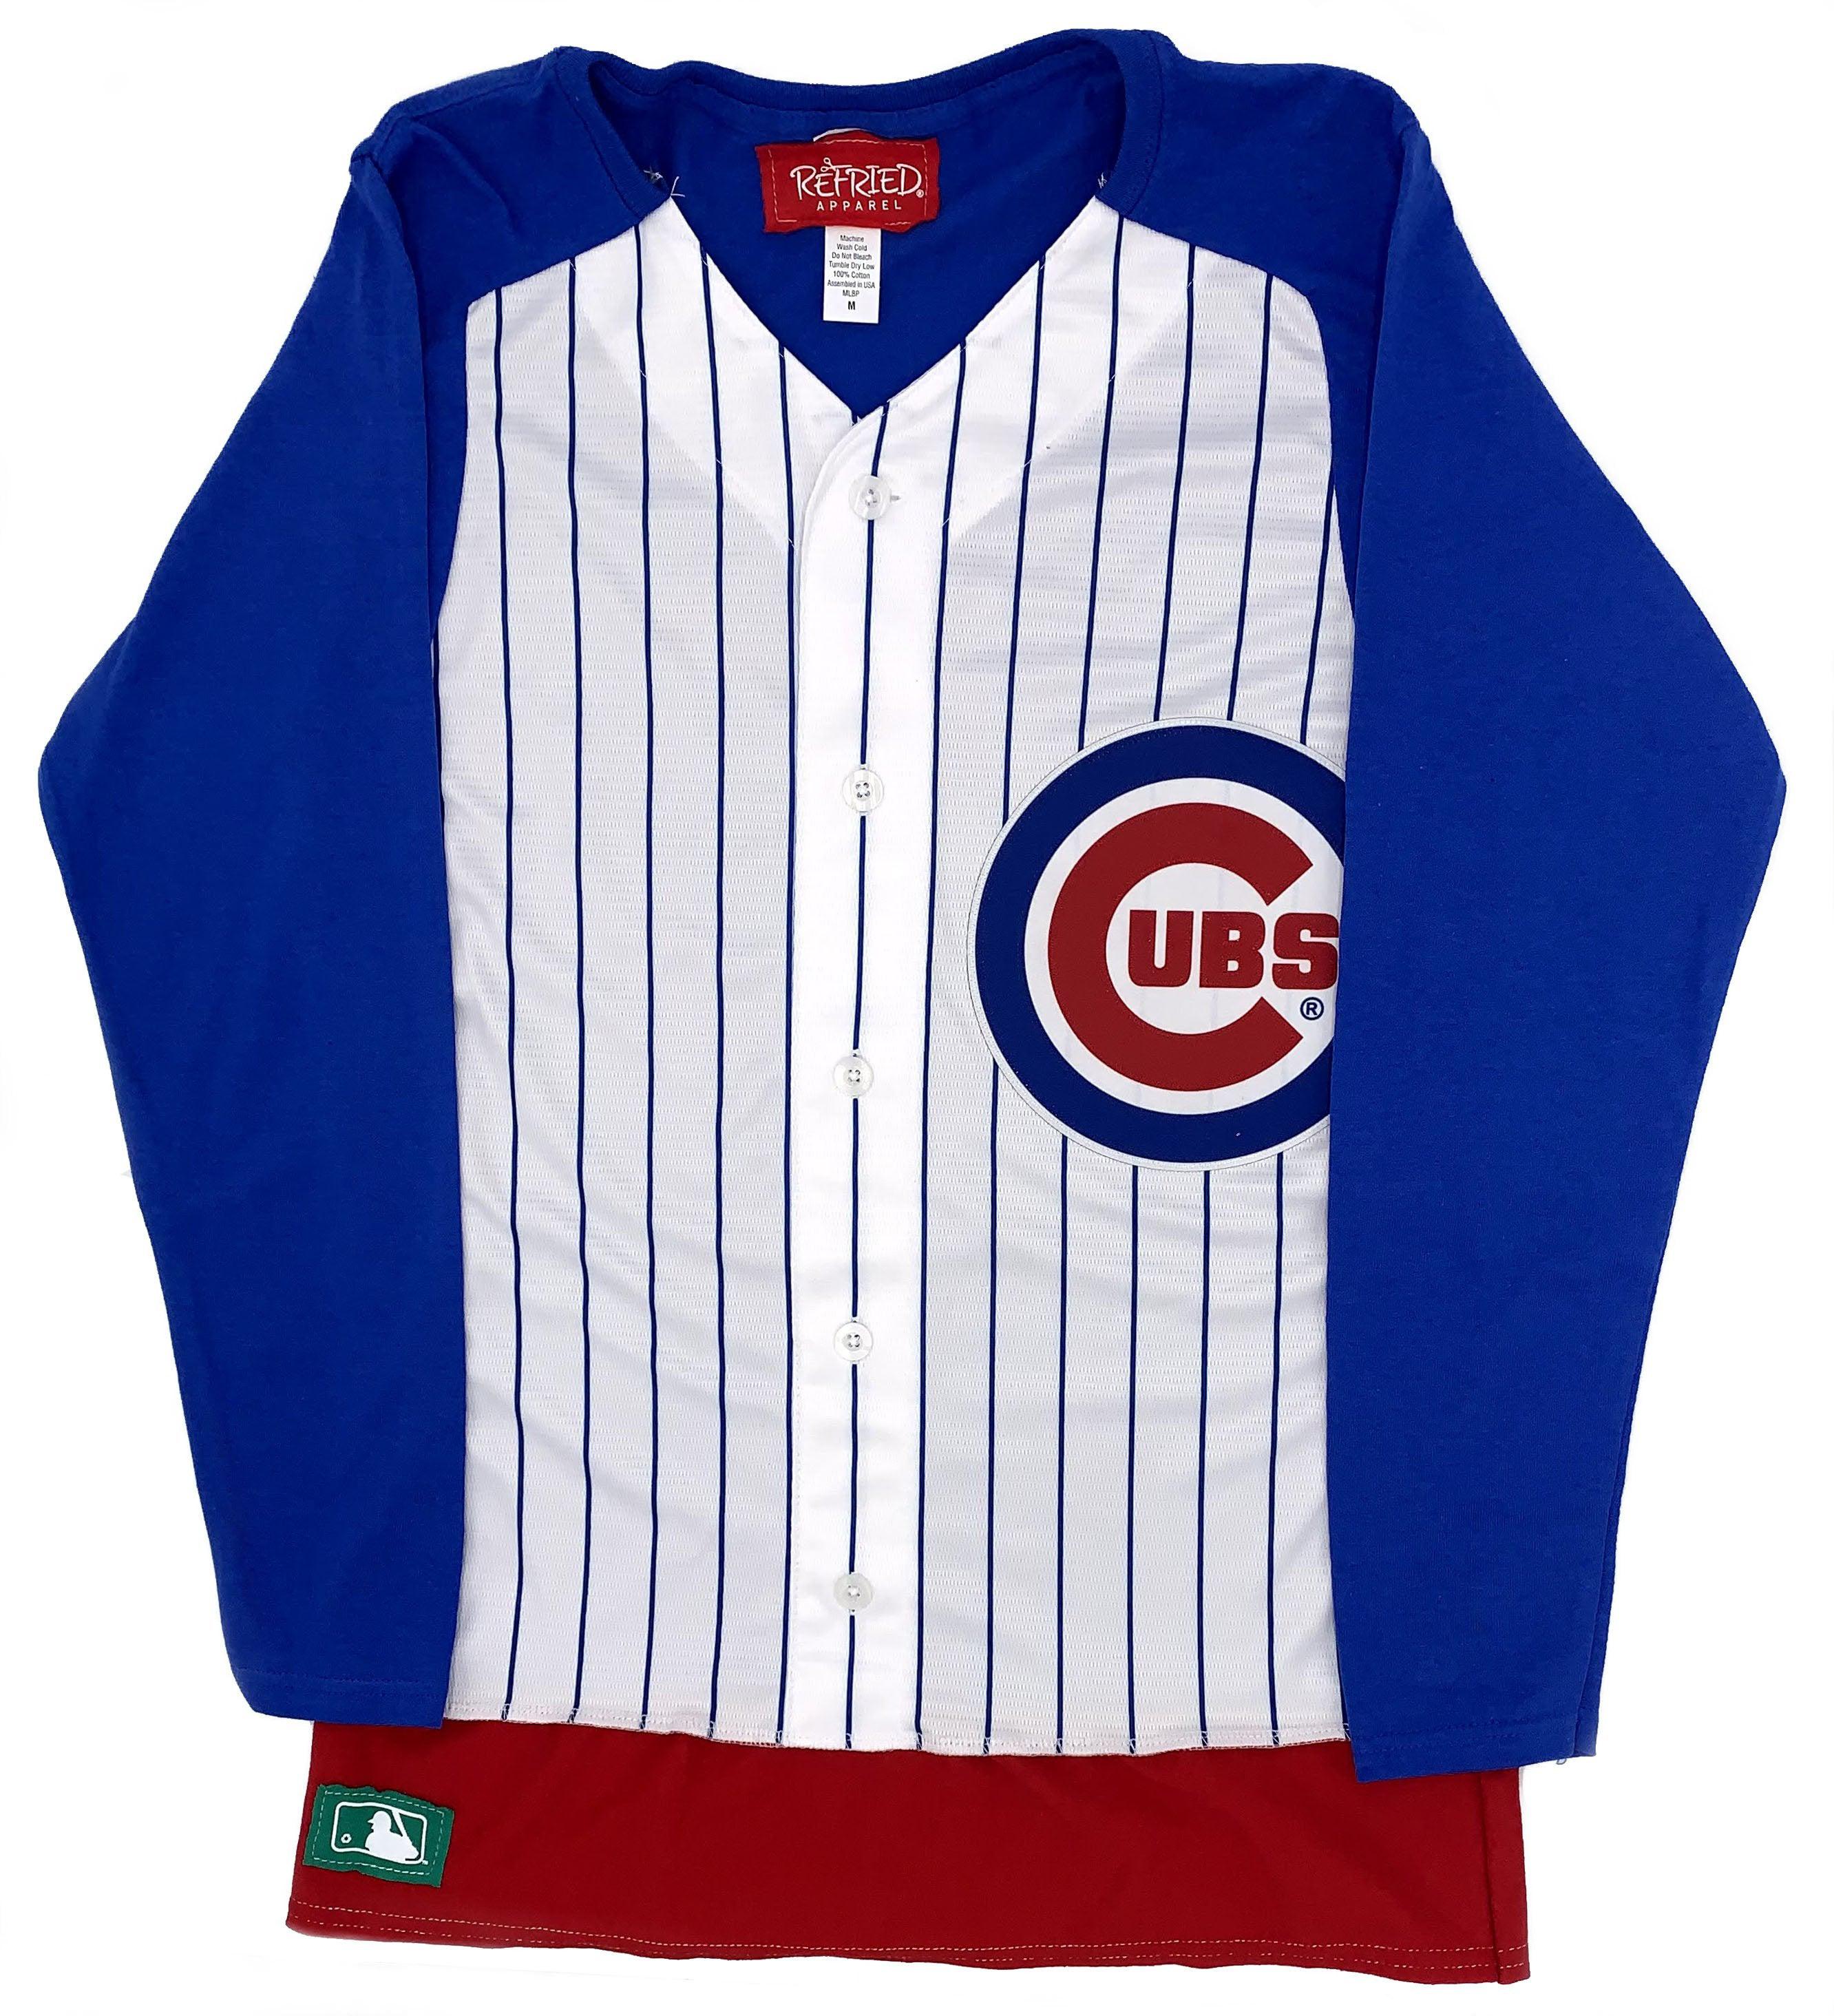 AMAZING VINTAGE MAJESTIC CHICAGO CUBS 1914 JERSEY WITH OLD STYLE